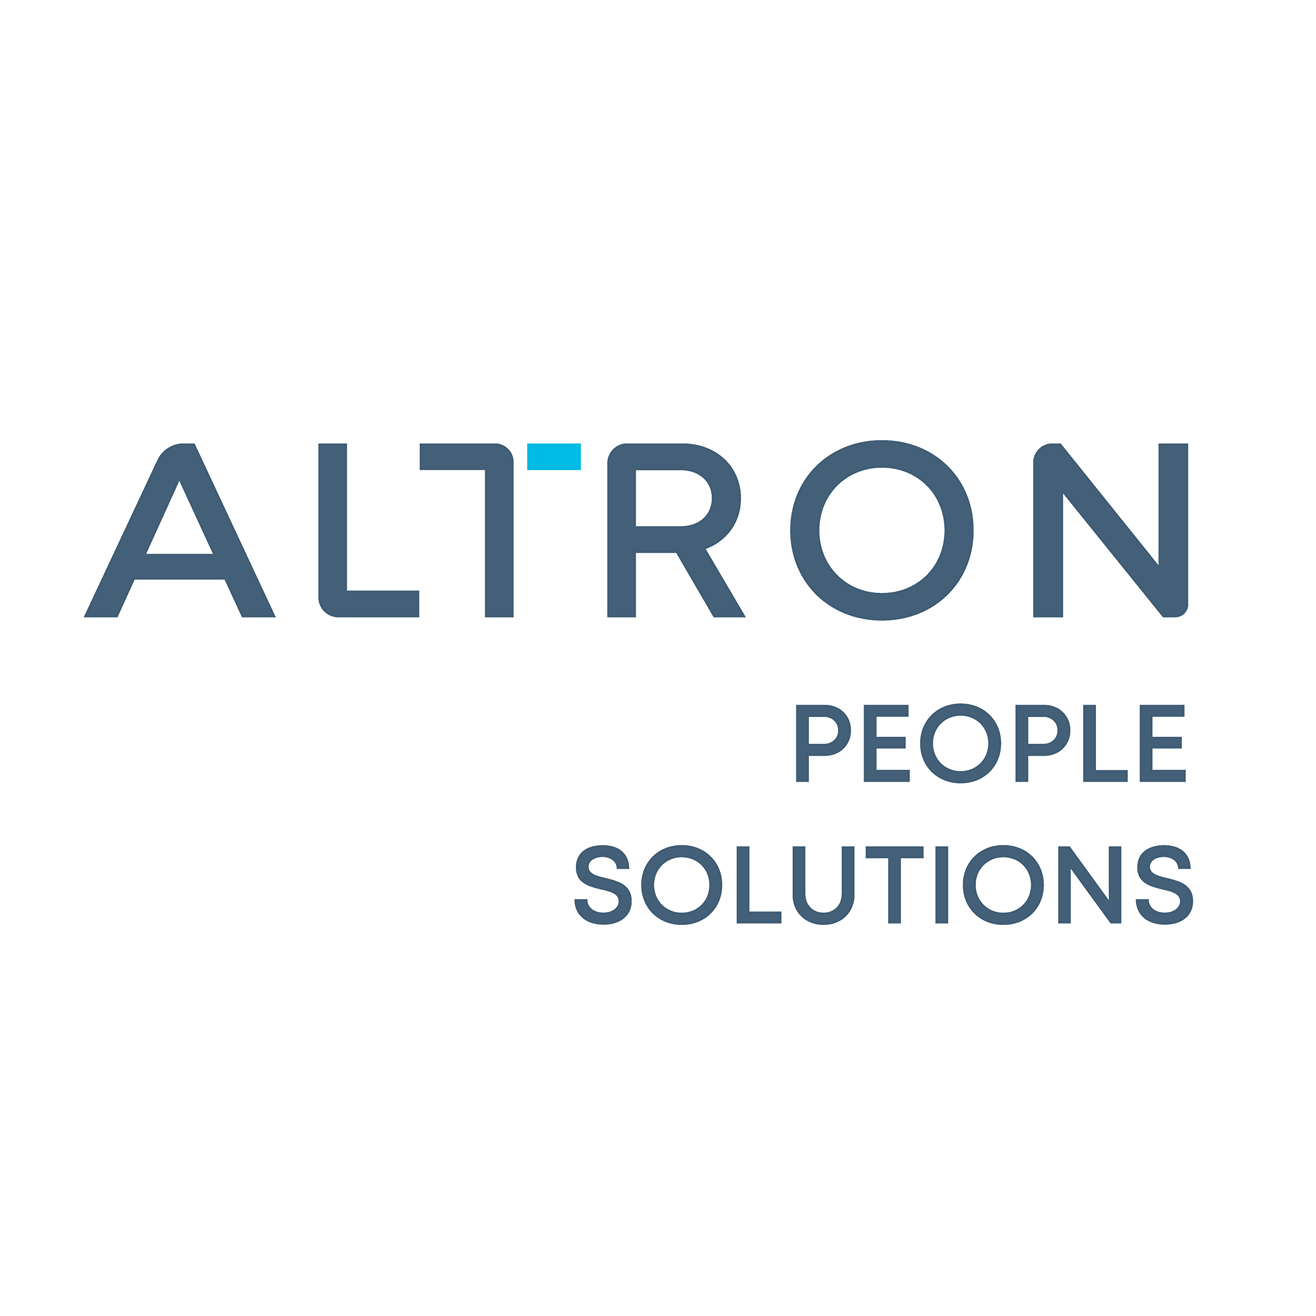 Altron People Solutions Logo